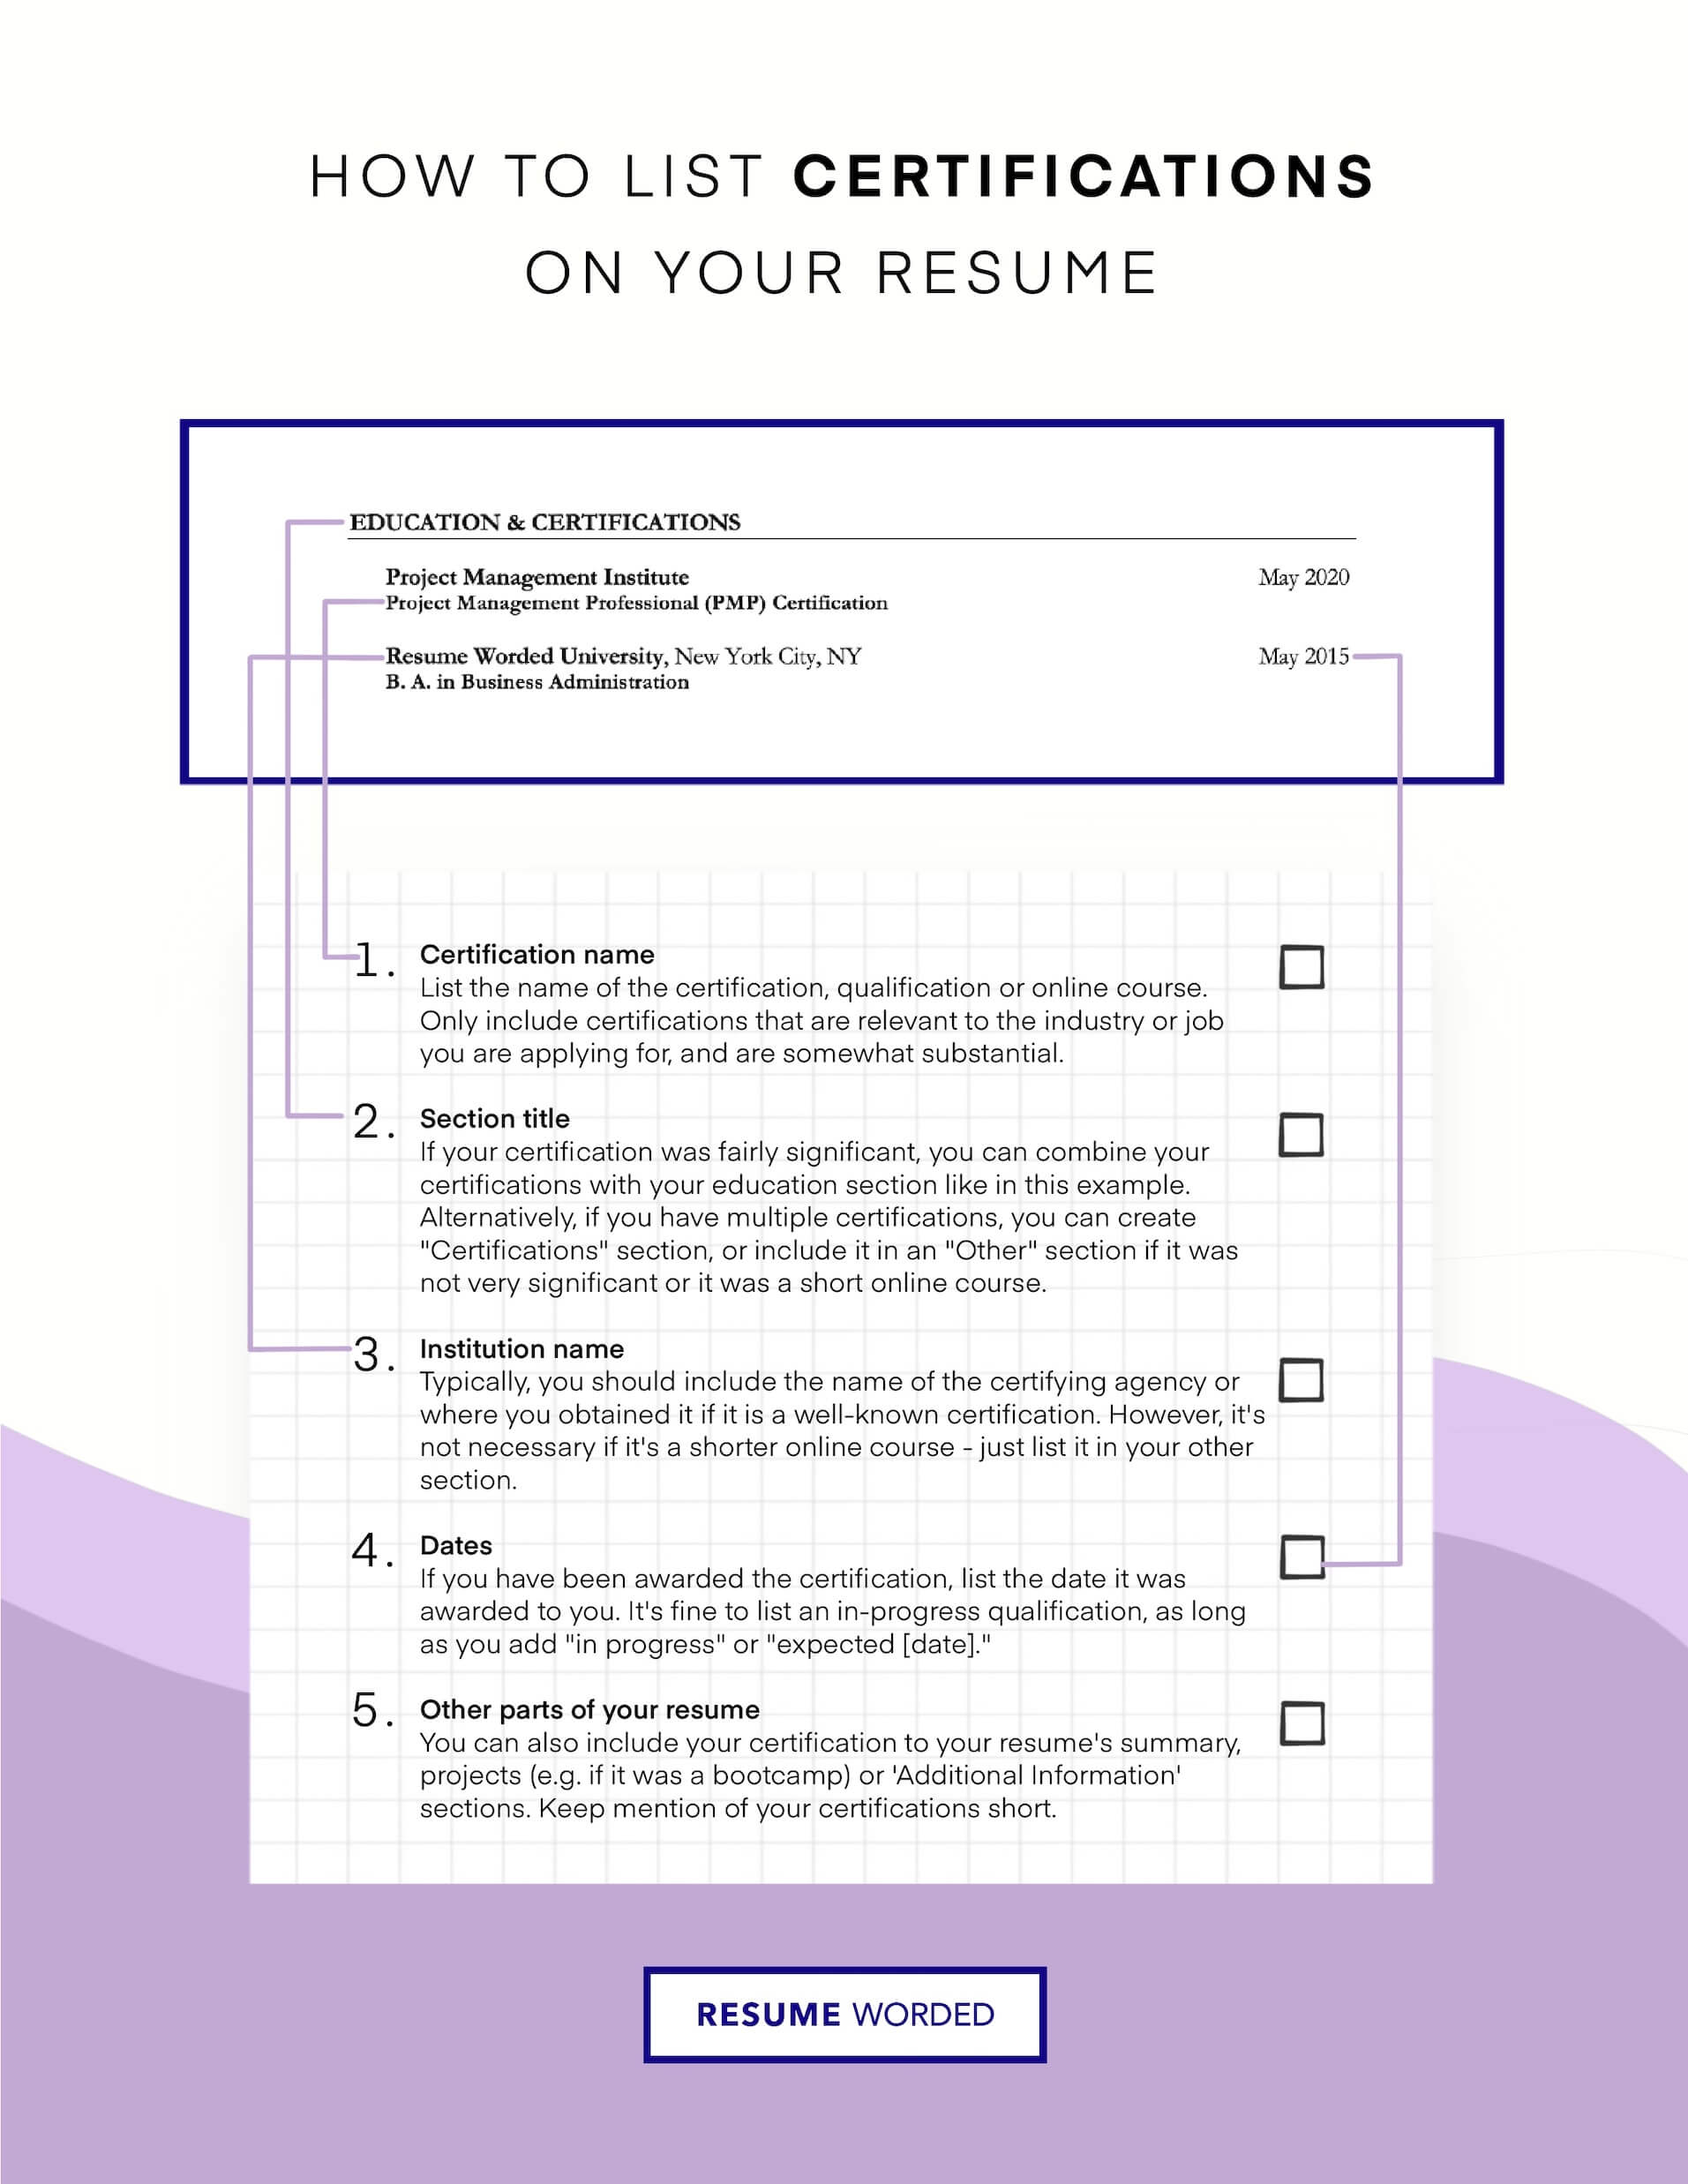 Enhance your resume by pursuing certification. - Entry-Level IT Support Specialist Resume